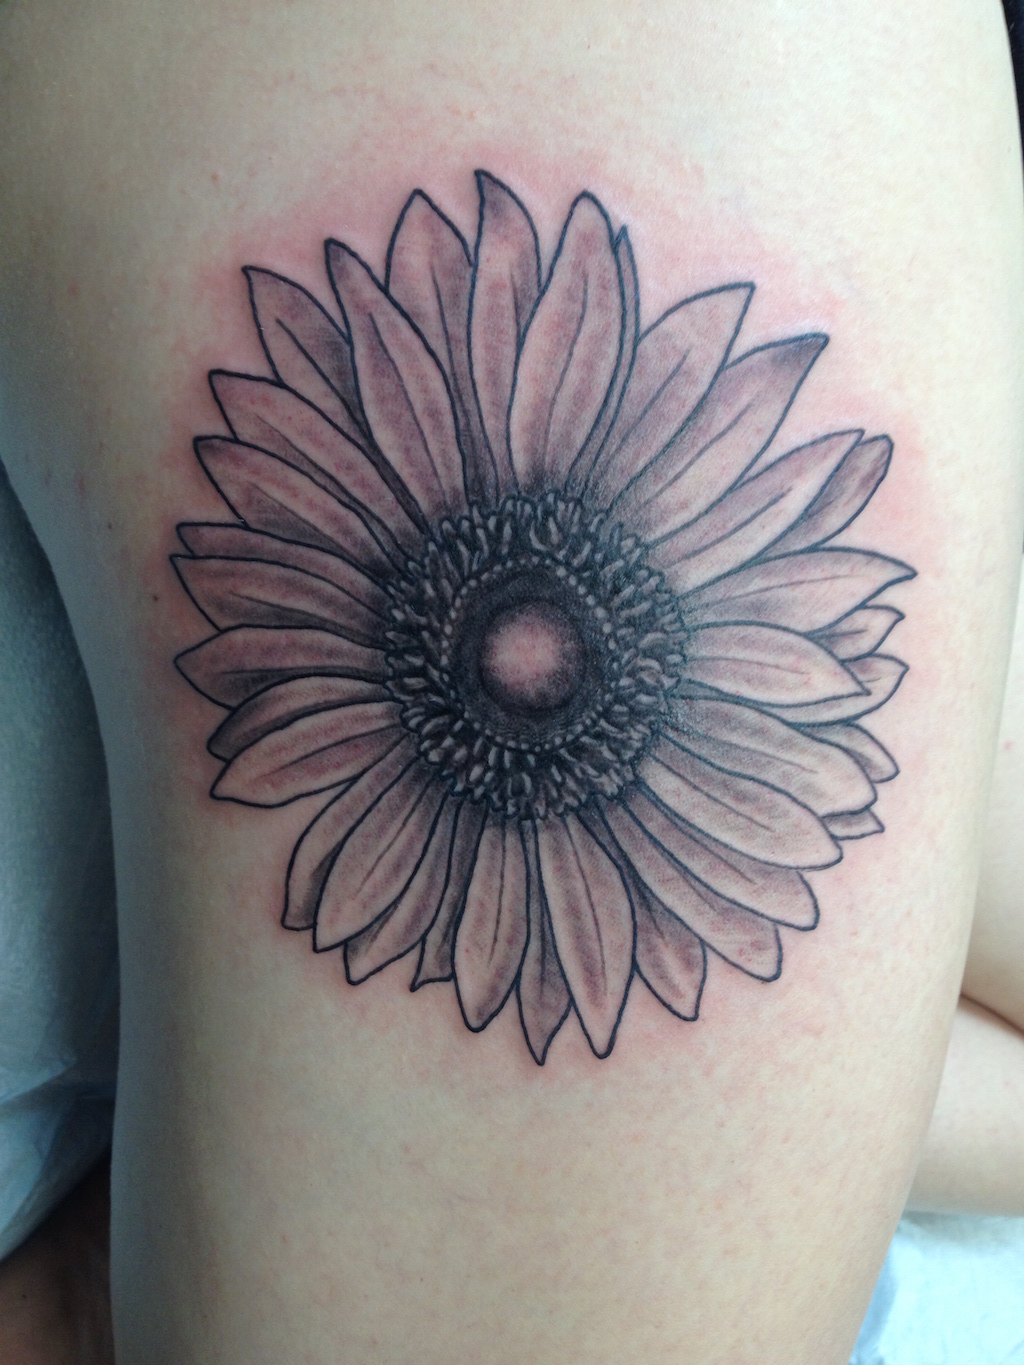 Tattoo-Inspiration-of-Sunflower-posted-by-Chris-Ludgate